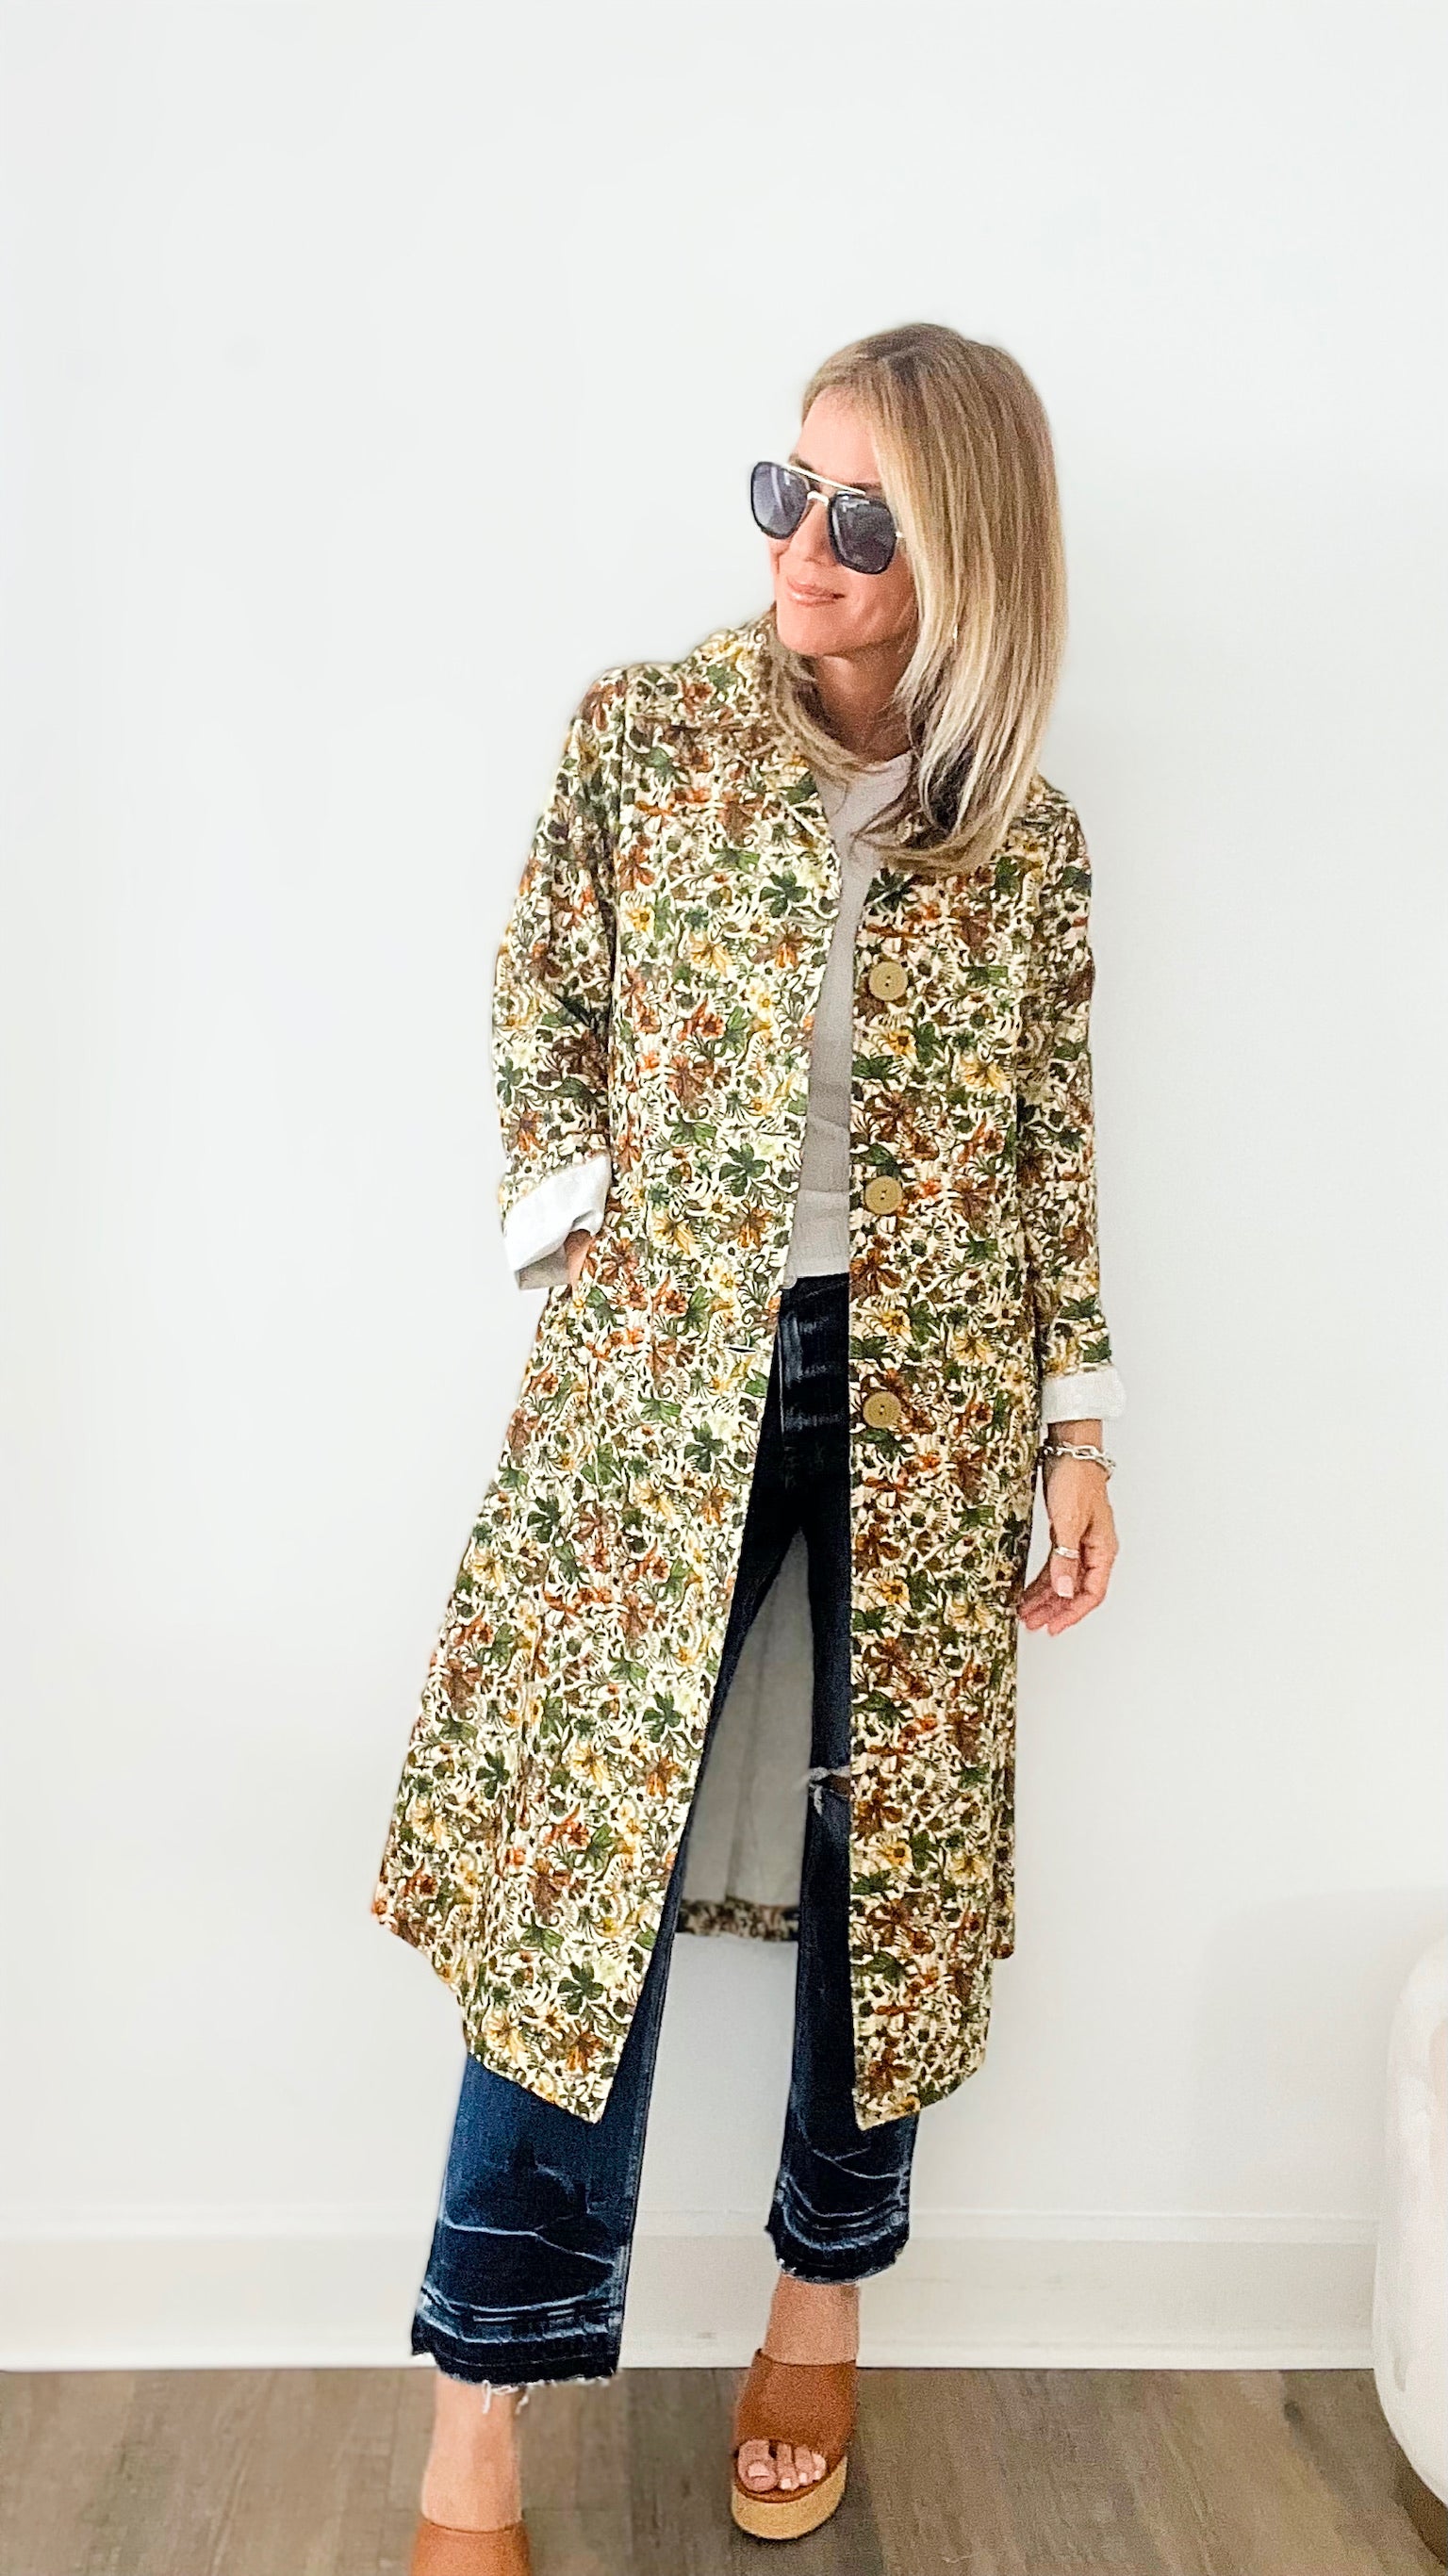 Flower Show Long Jacket-160 Jackets-TOUCHE PRIVE-Coastal Bloom Boutique, find the trendiest versions of the popular styles and looks Located in Indialantic, FL